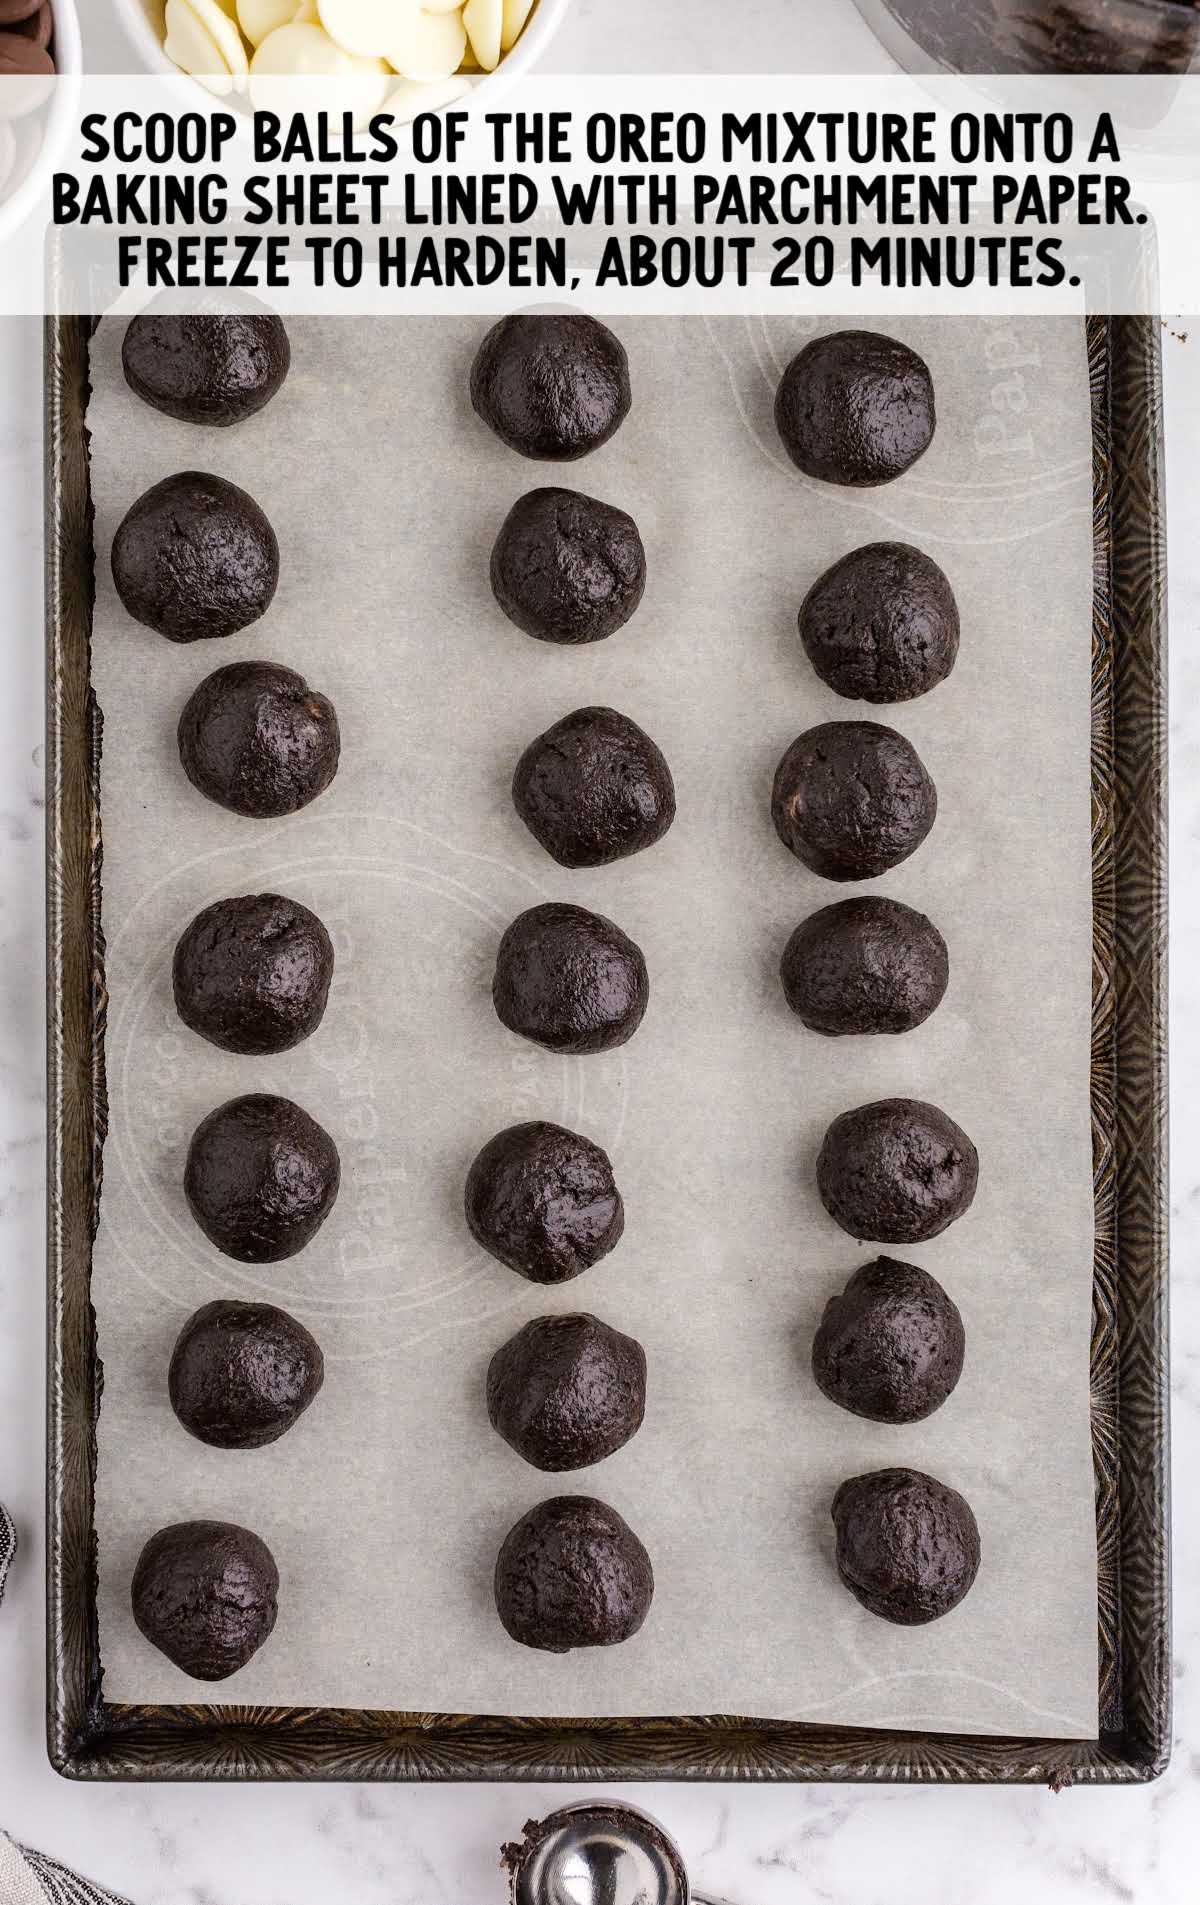 oreo mixture scooped into balls and placed on a baking sheet